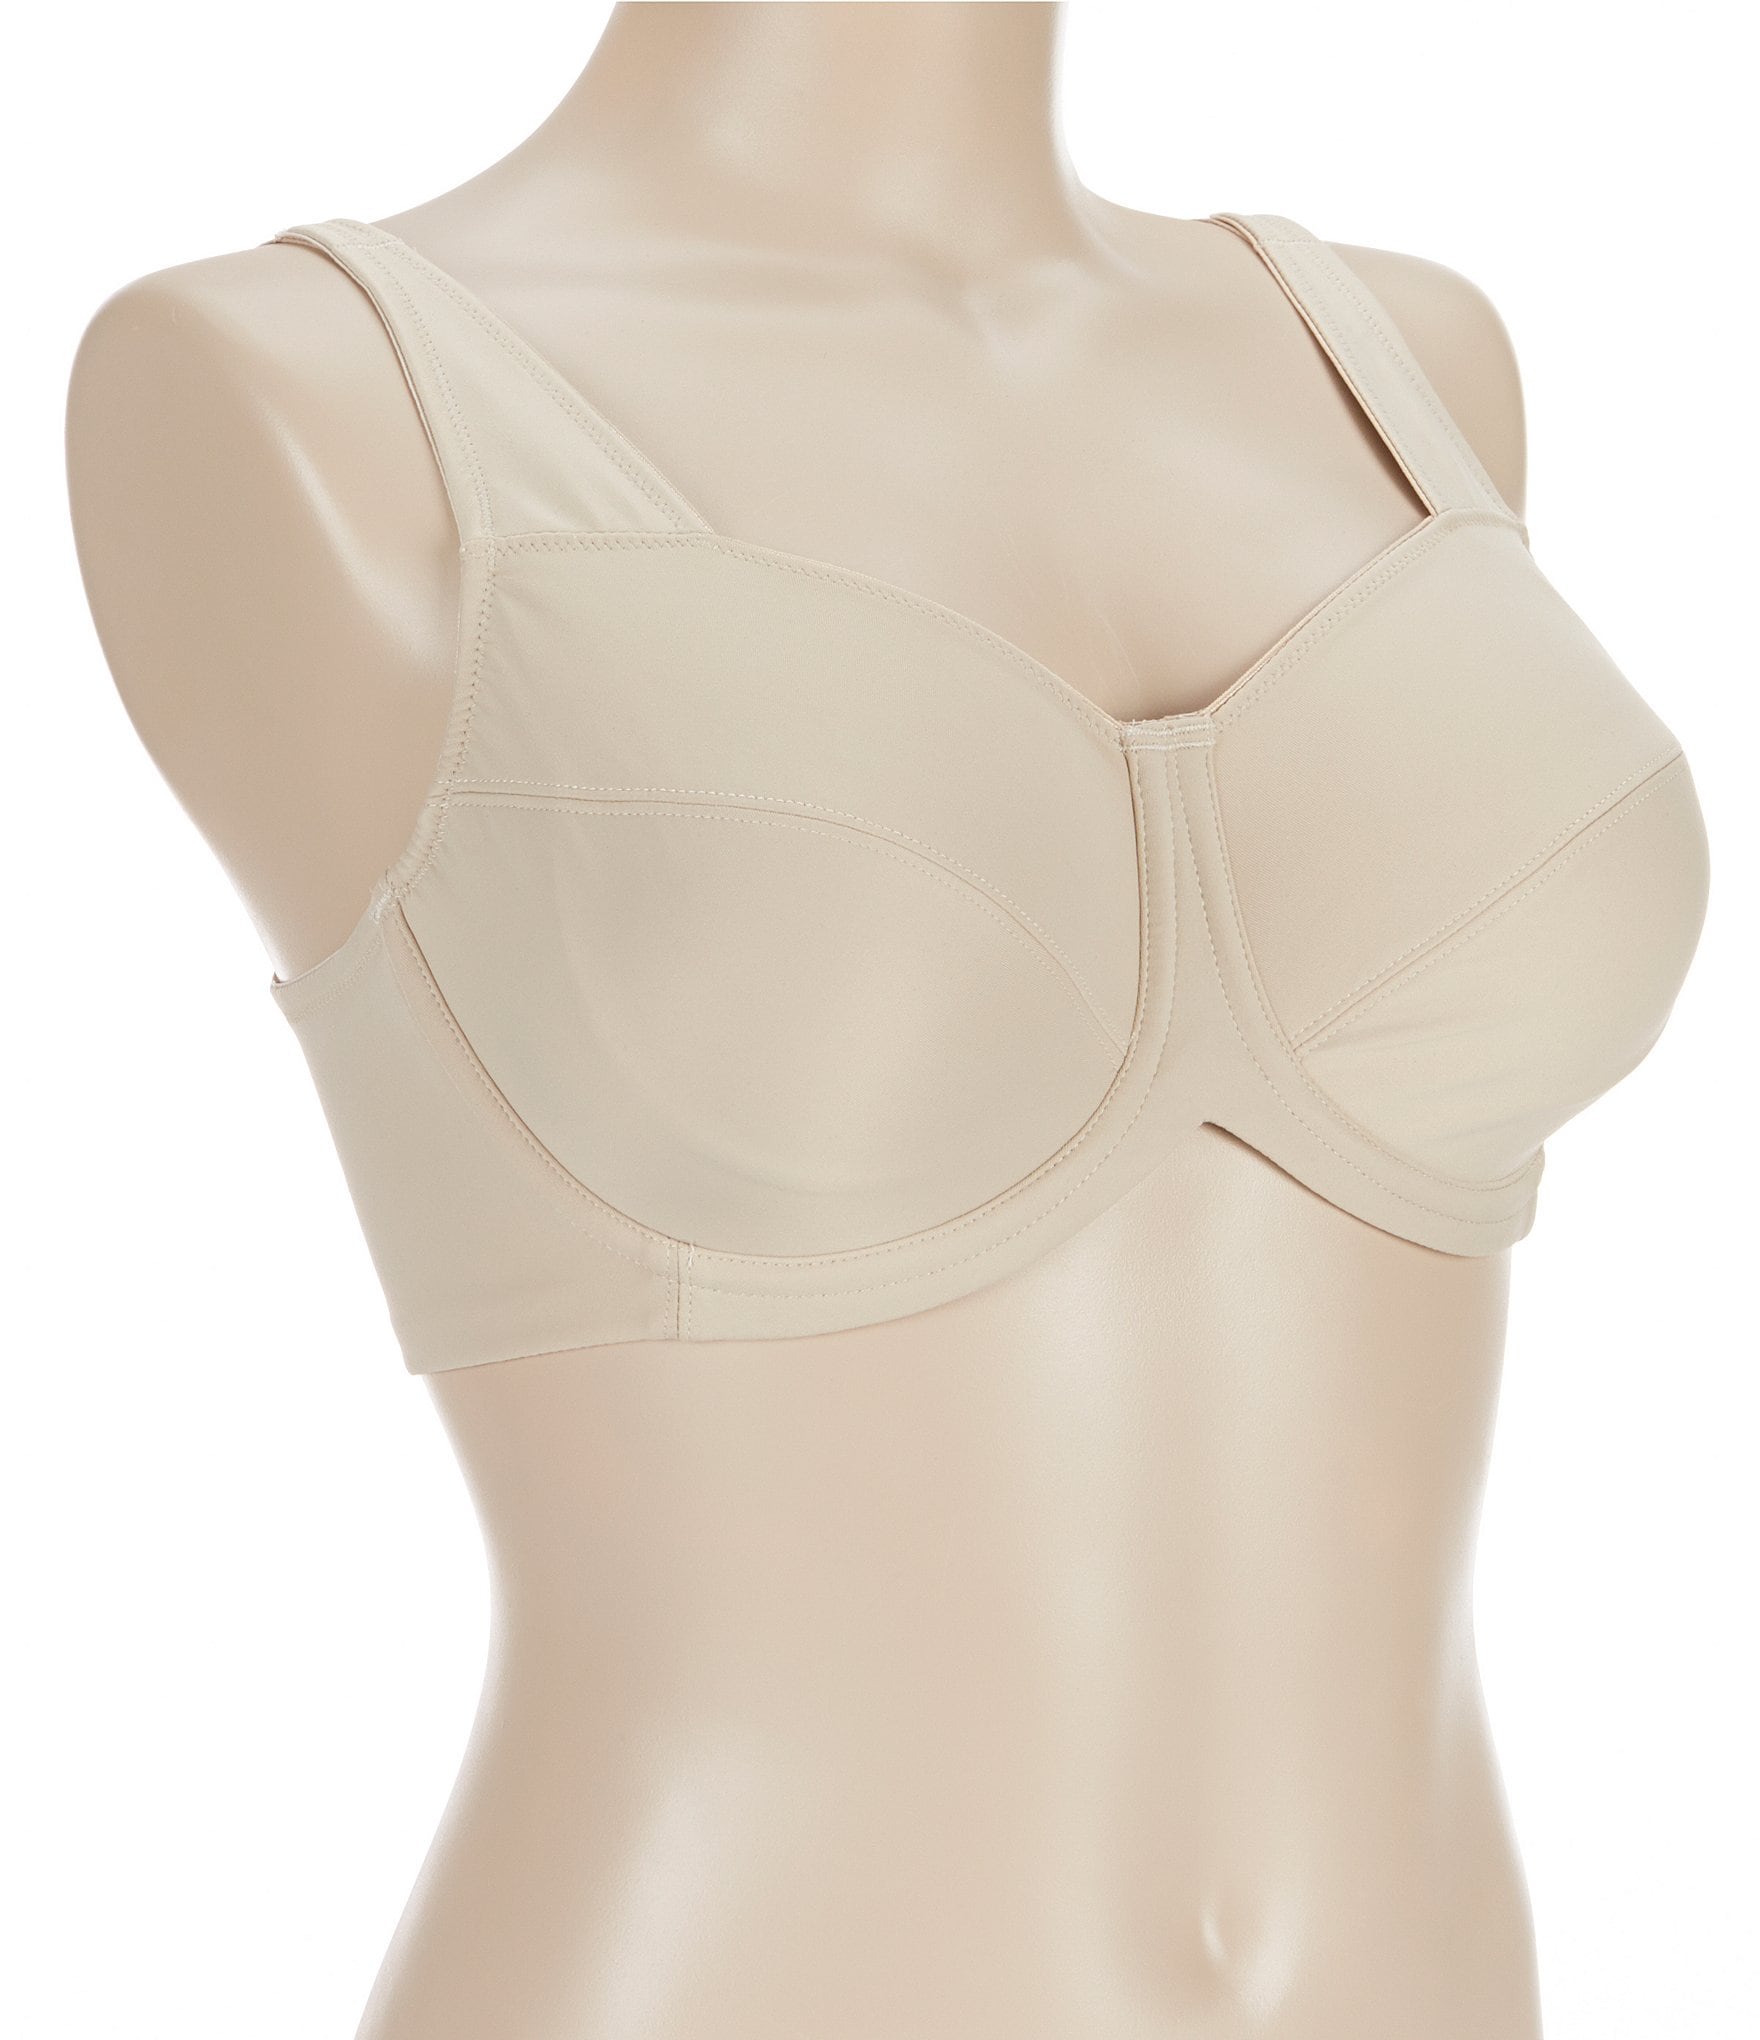 MY INNER WORLD - The Sonari Multipurpose collection of bras. Engineered to  be the perfect fit for most body types with revolutionary coverage and  radiant fabric, the seamless smooth cups of this